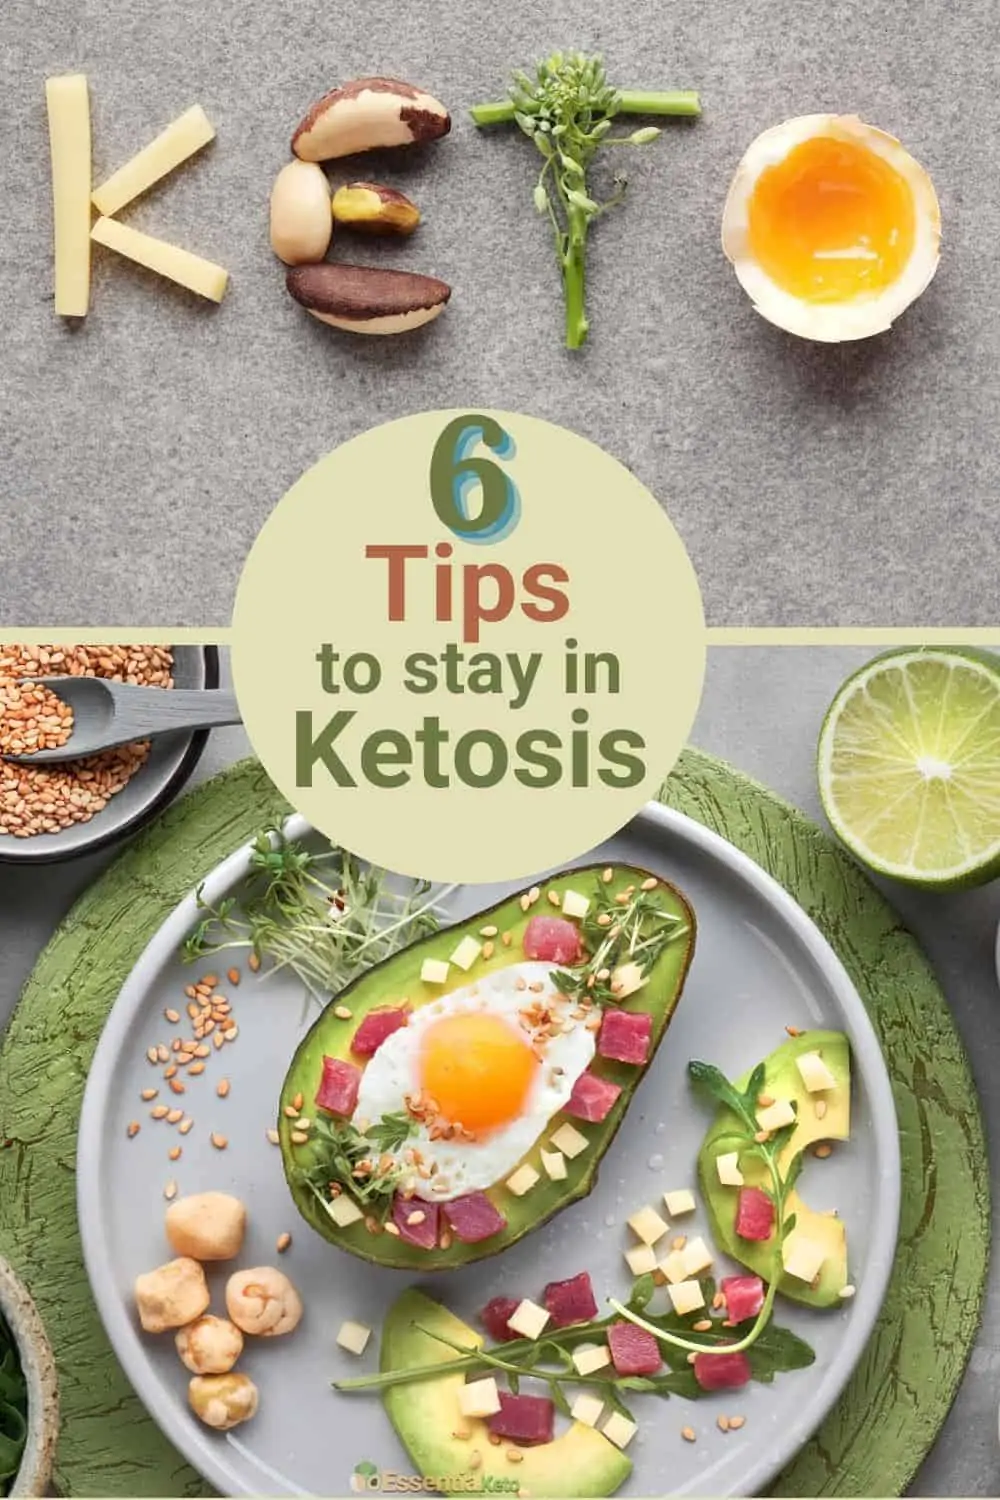 6 tips to stay in ketosis